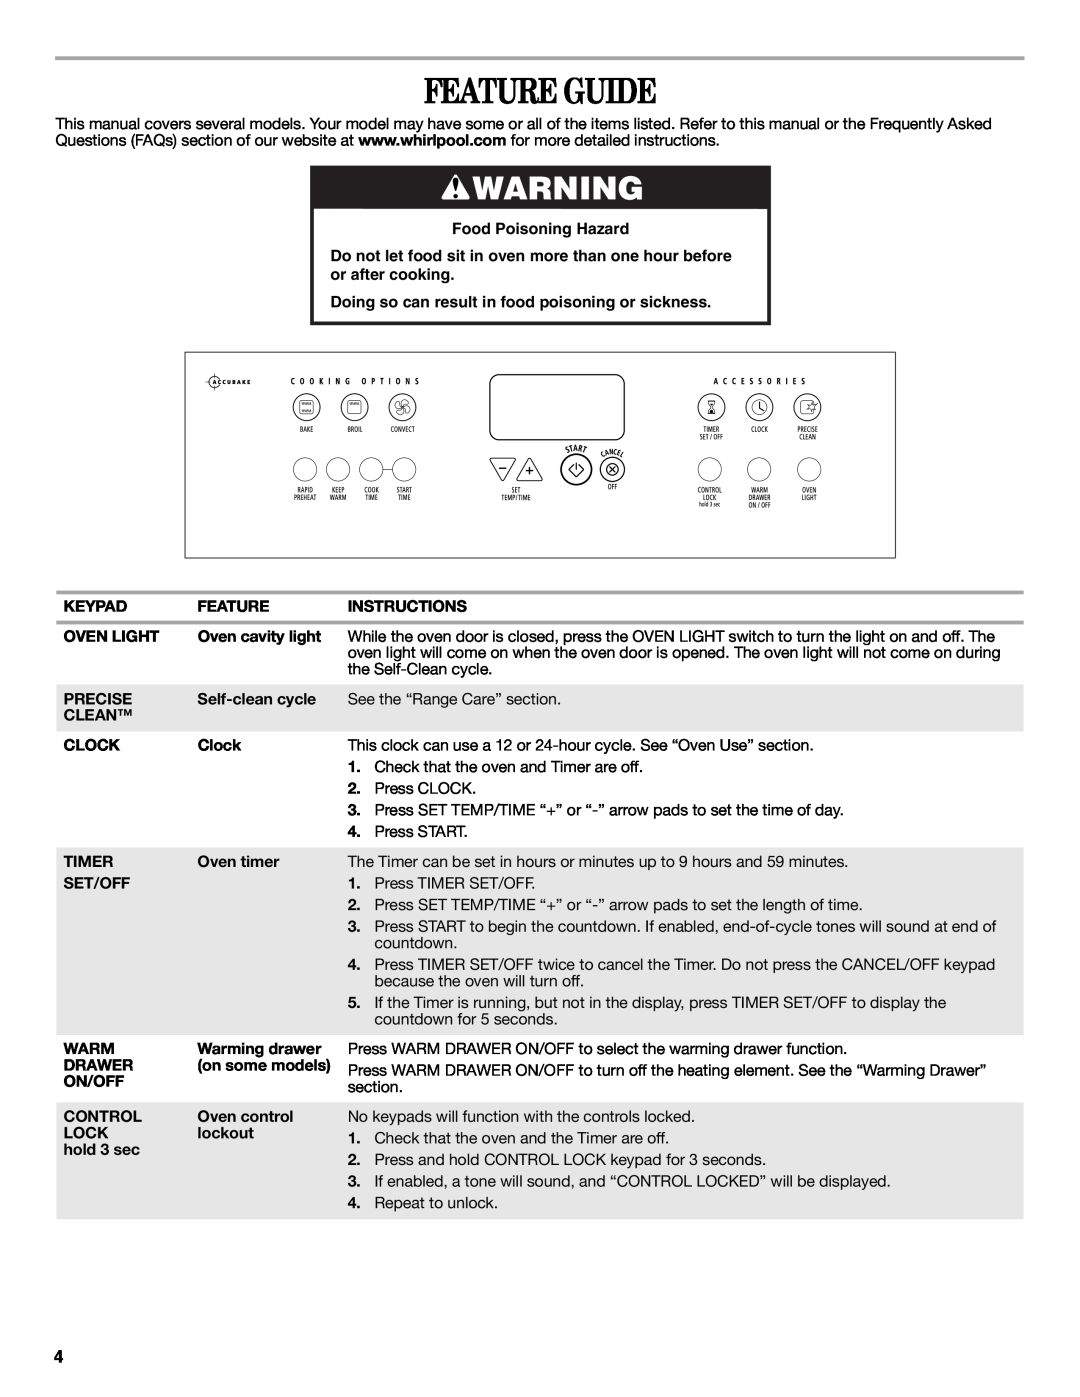 Whirlpool GFG471LVS warranty Feature Guide, Food Poisoning Hazard, Doing so can result in food poisoning or sickness 